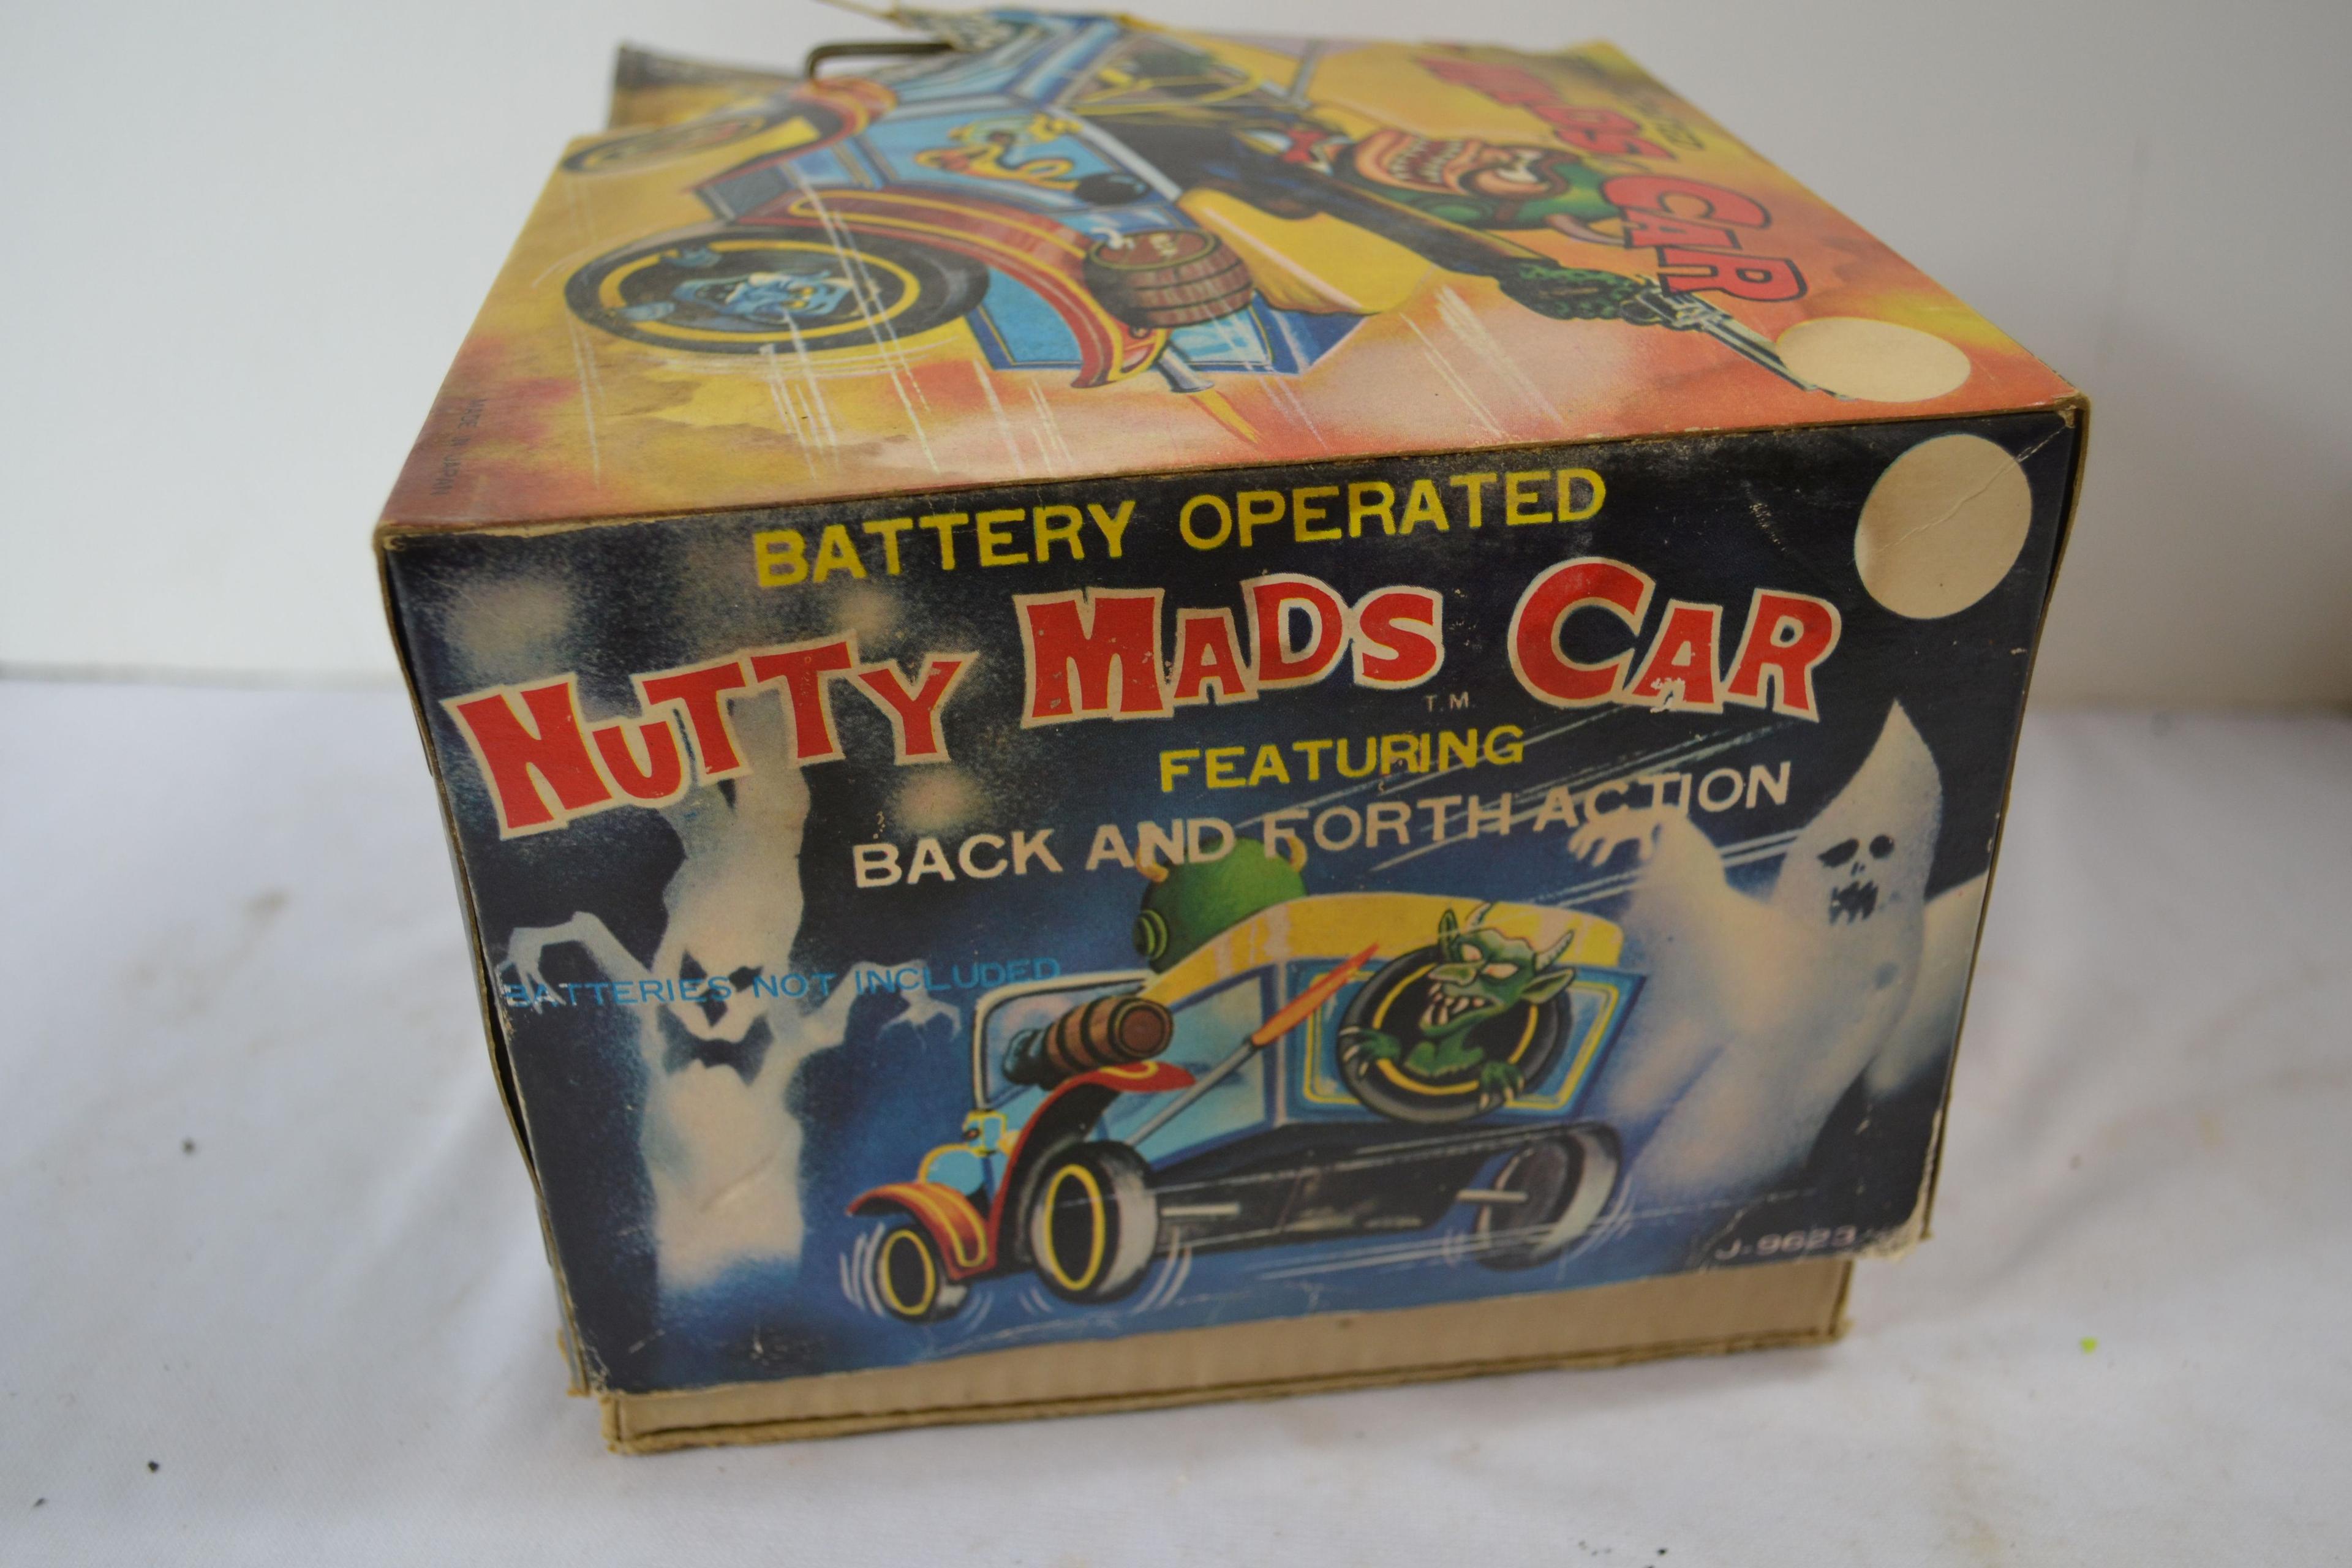 Marx Toys Nutty Mads Car Tin Toy; Battery-Operated w/Original Box. Box has condition issues.